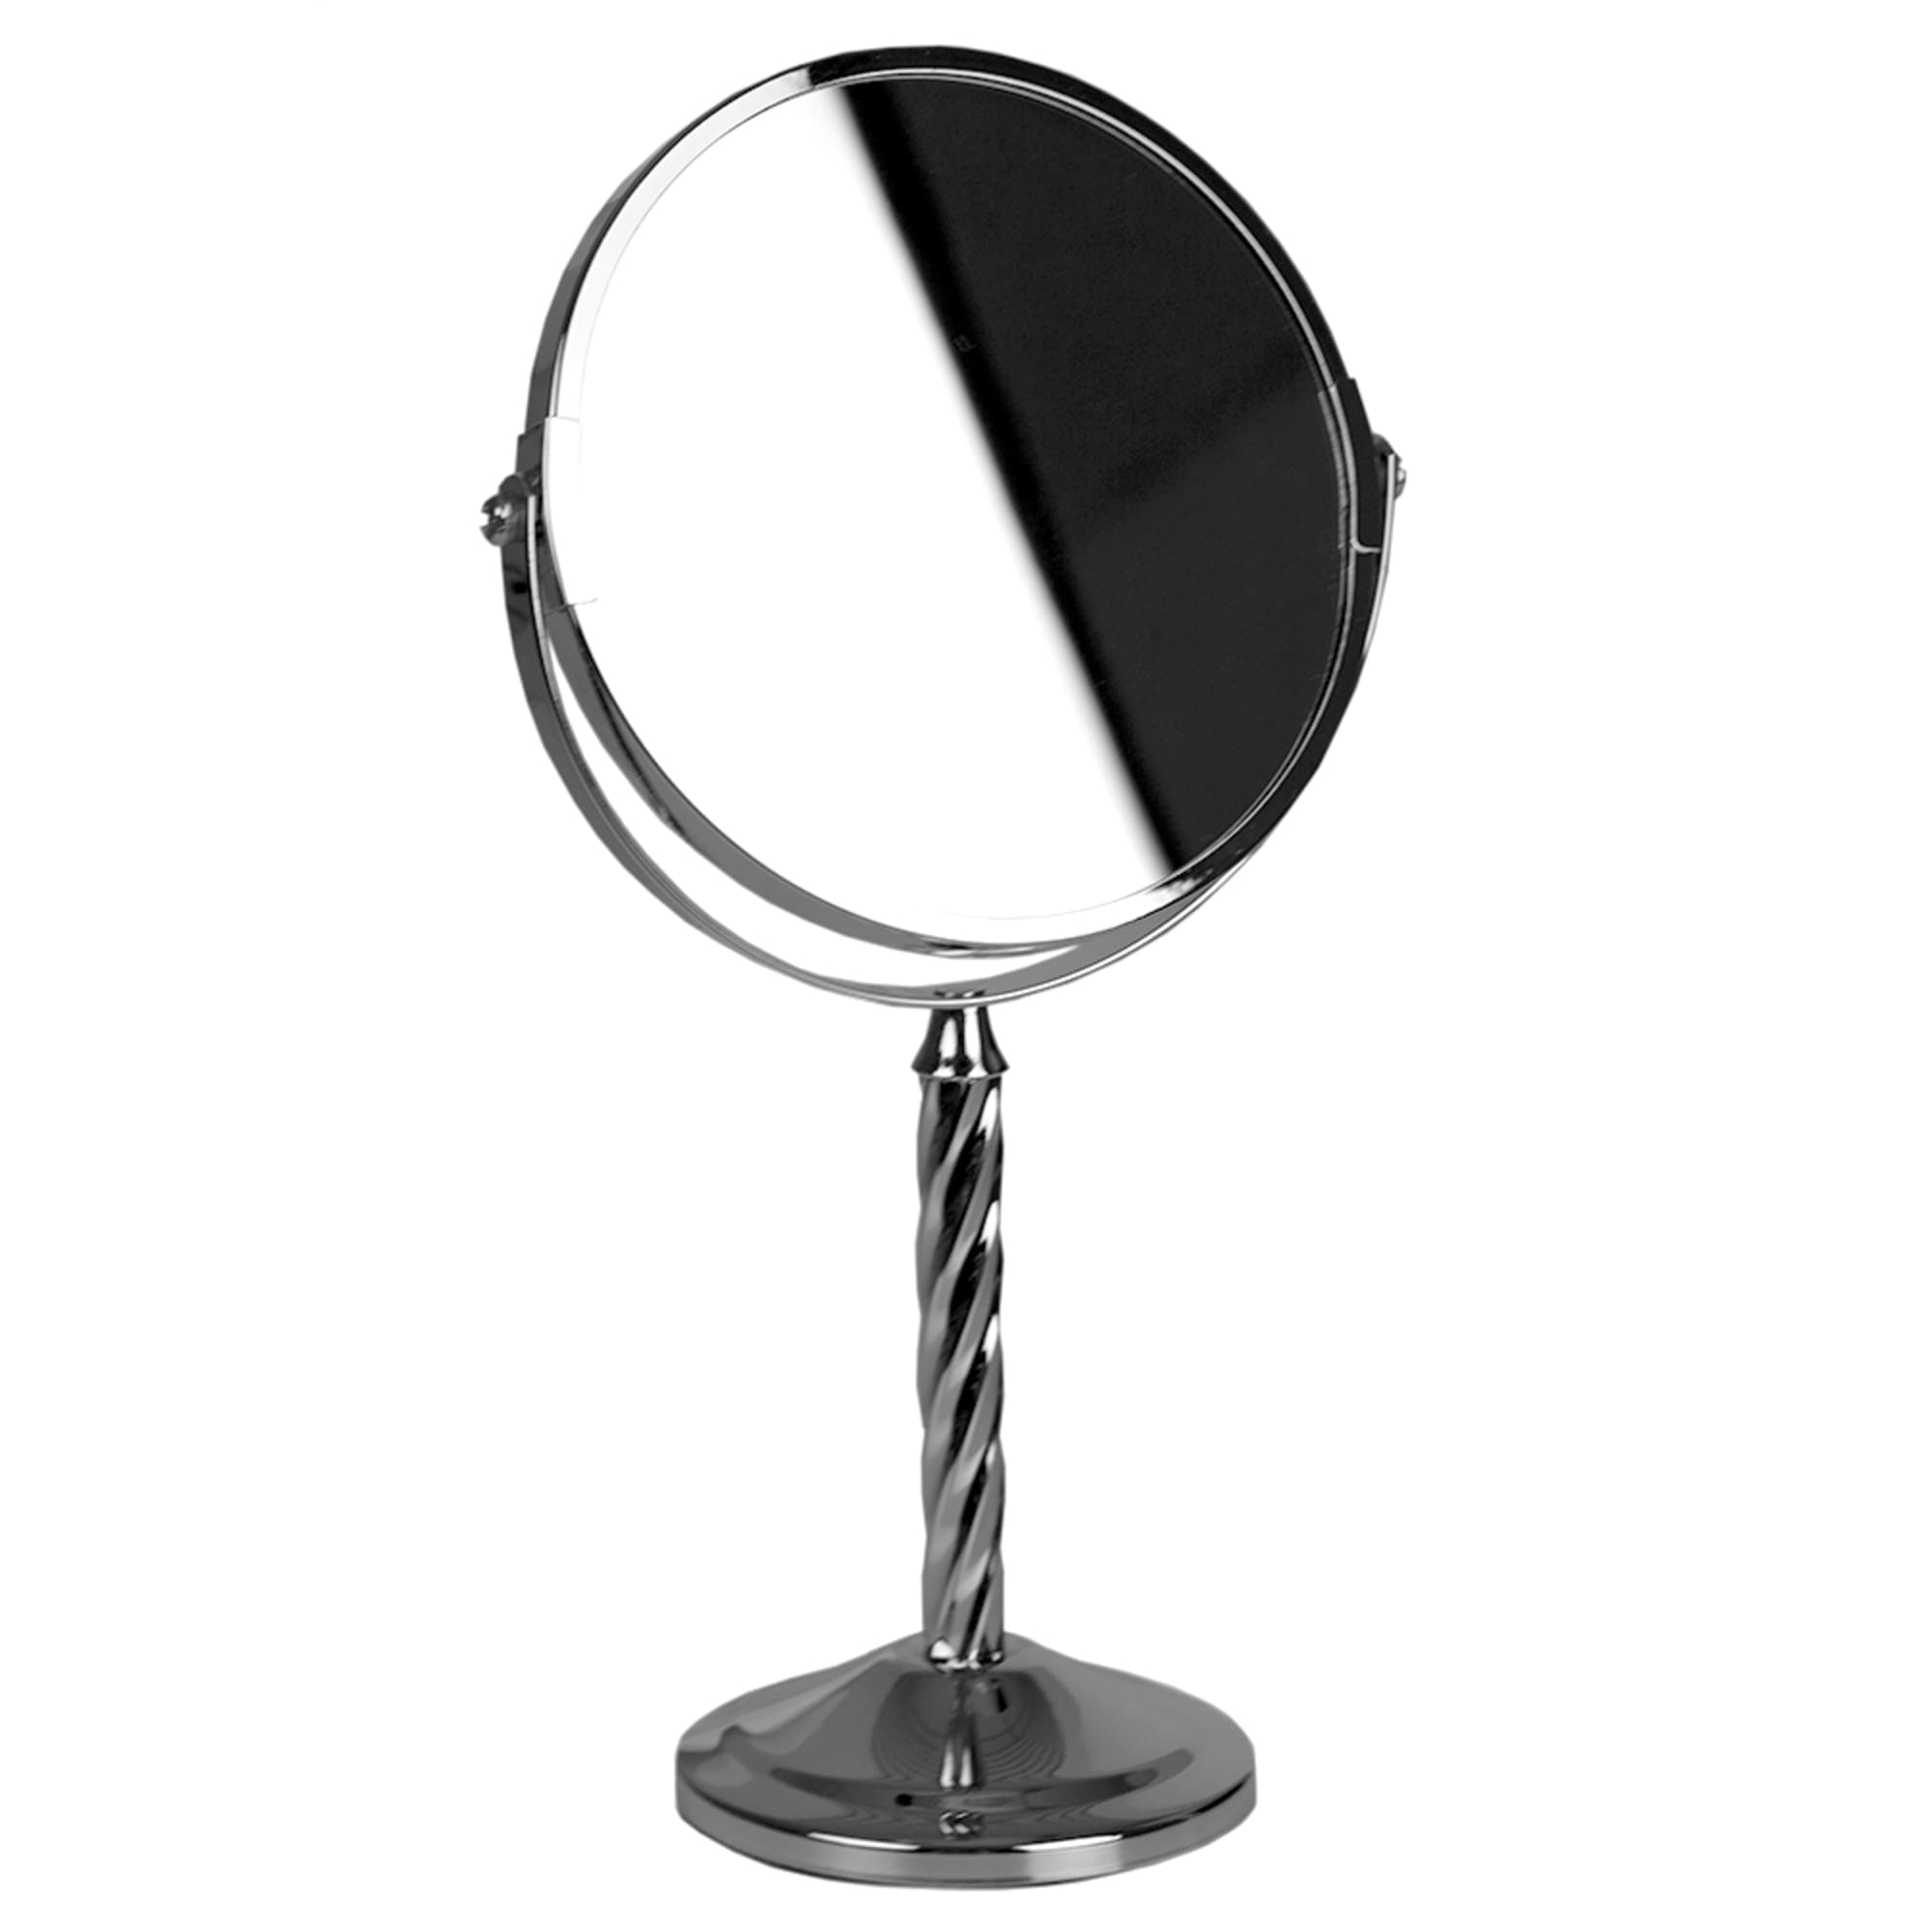 Home Basics Spiral Double Sided Cosmetic Mirror, Chrome $10.00 EACH, CASE PACK OF 6